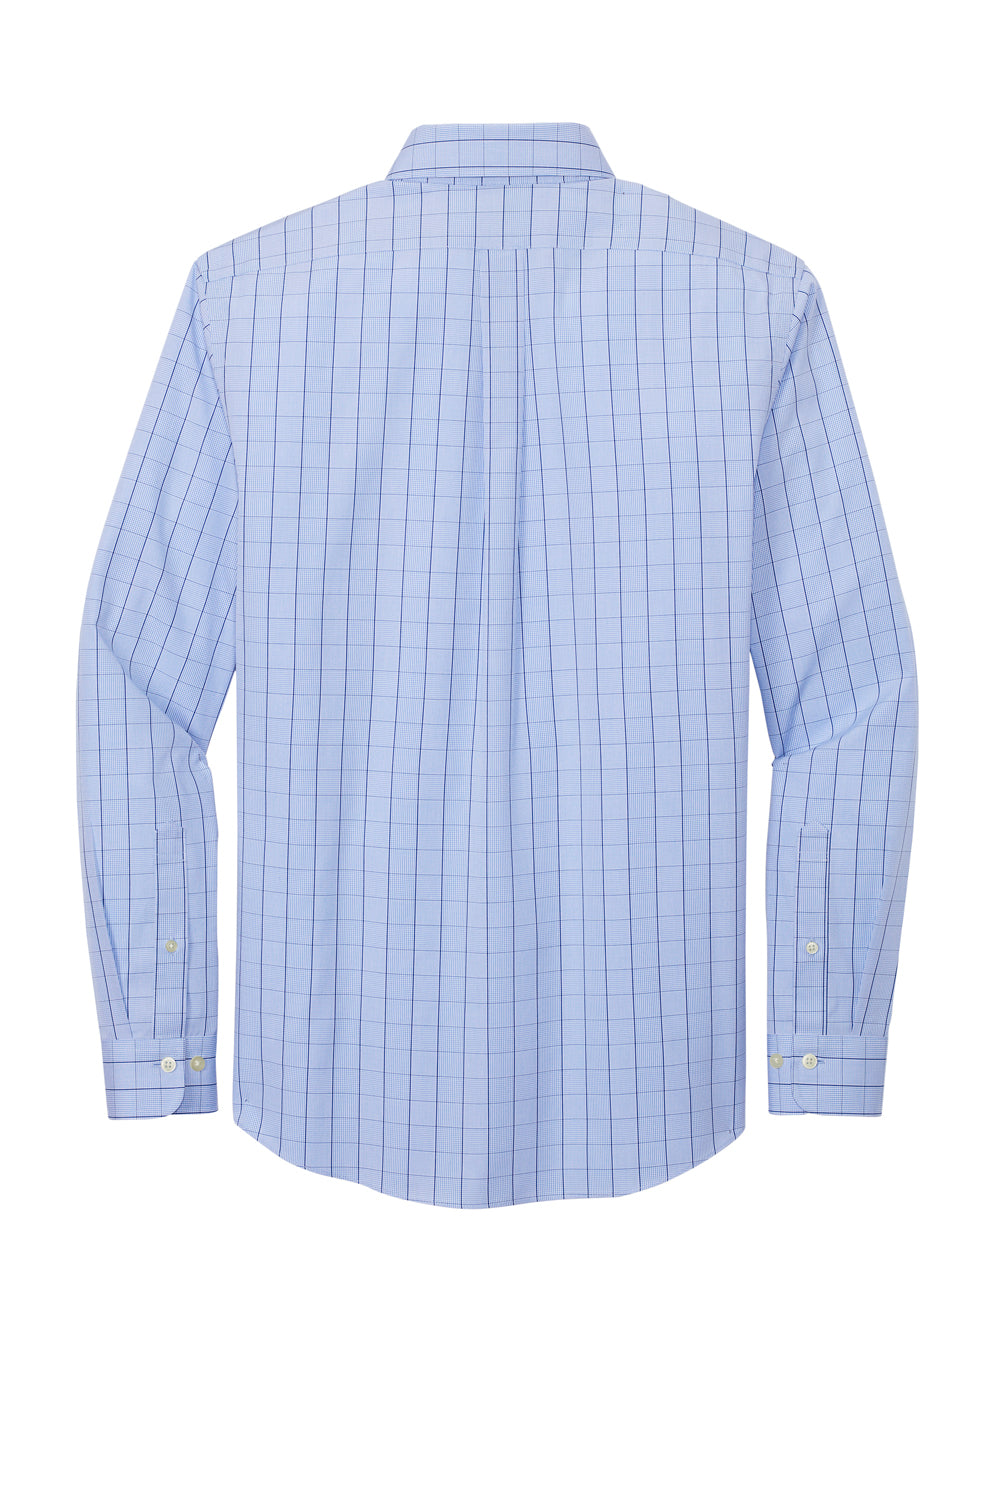 Brooks Brothers Mens Wrinkle Resistant Long Sleeve Button Down Shirt w/ Pocket Newport Blue Flat Back